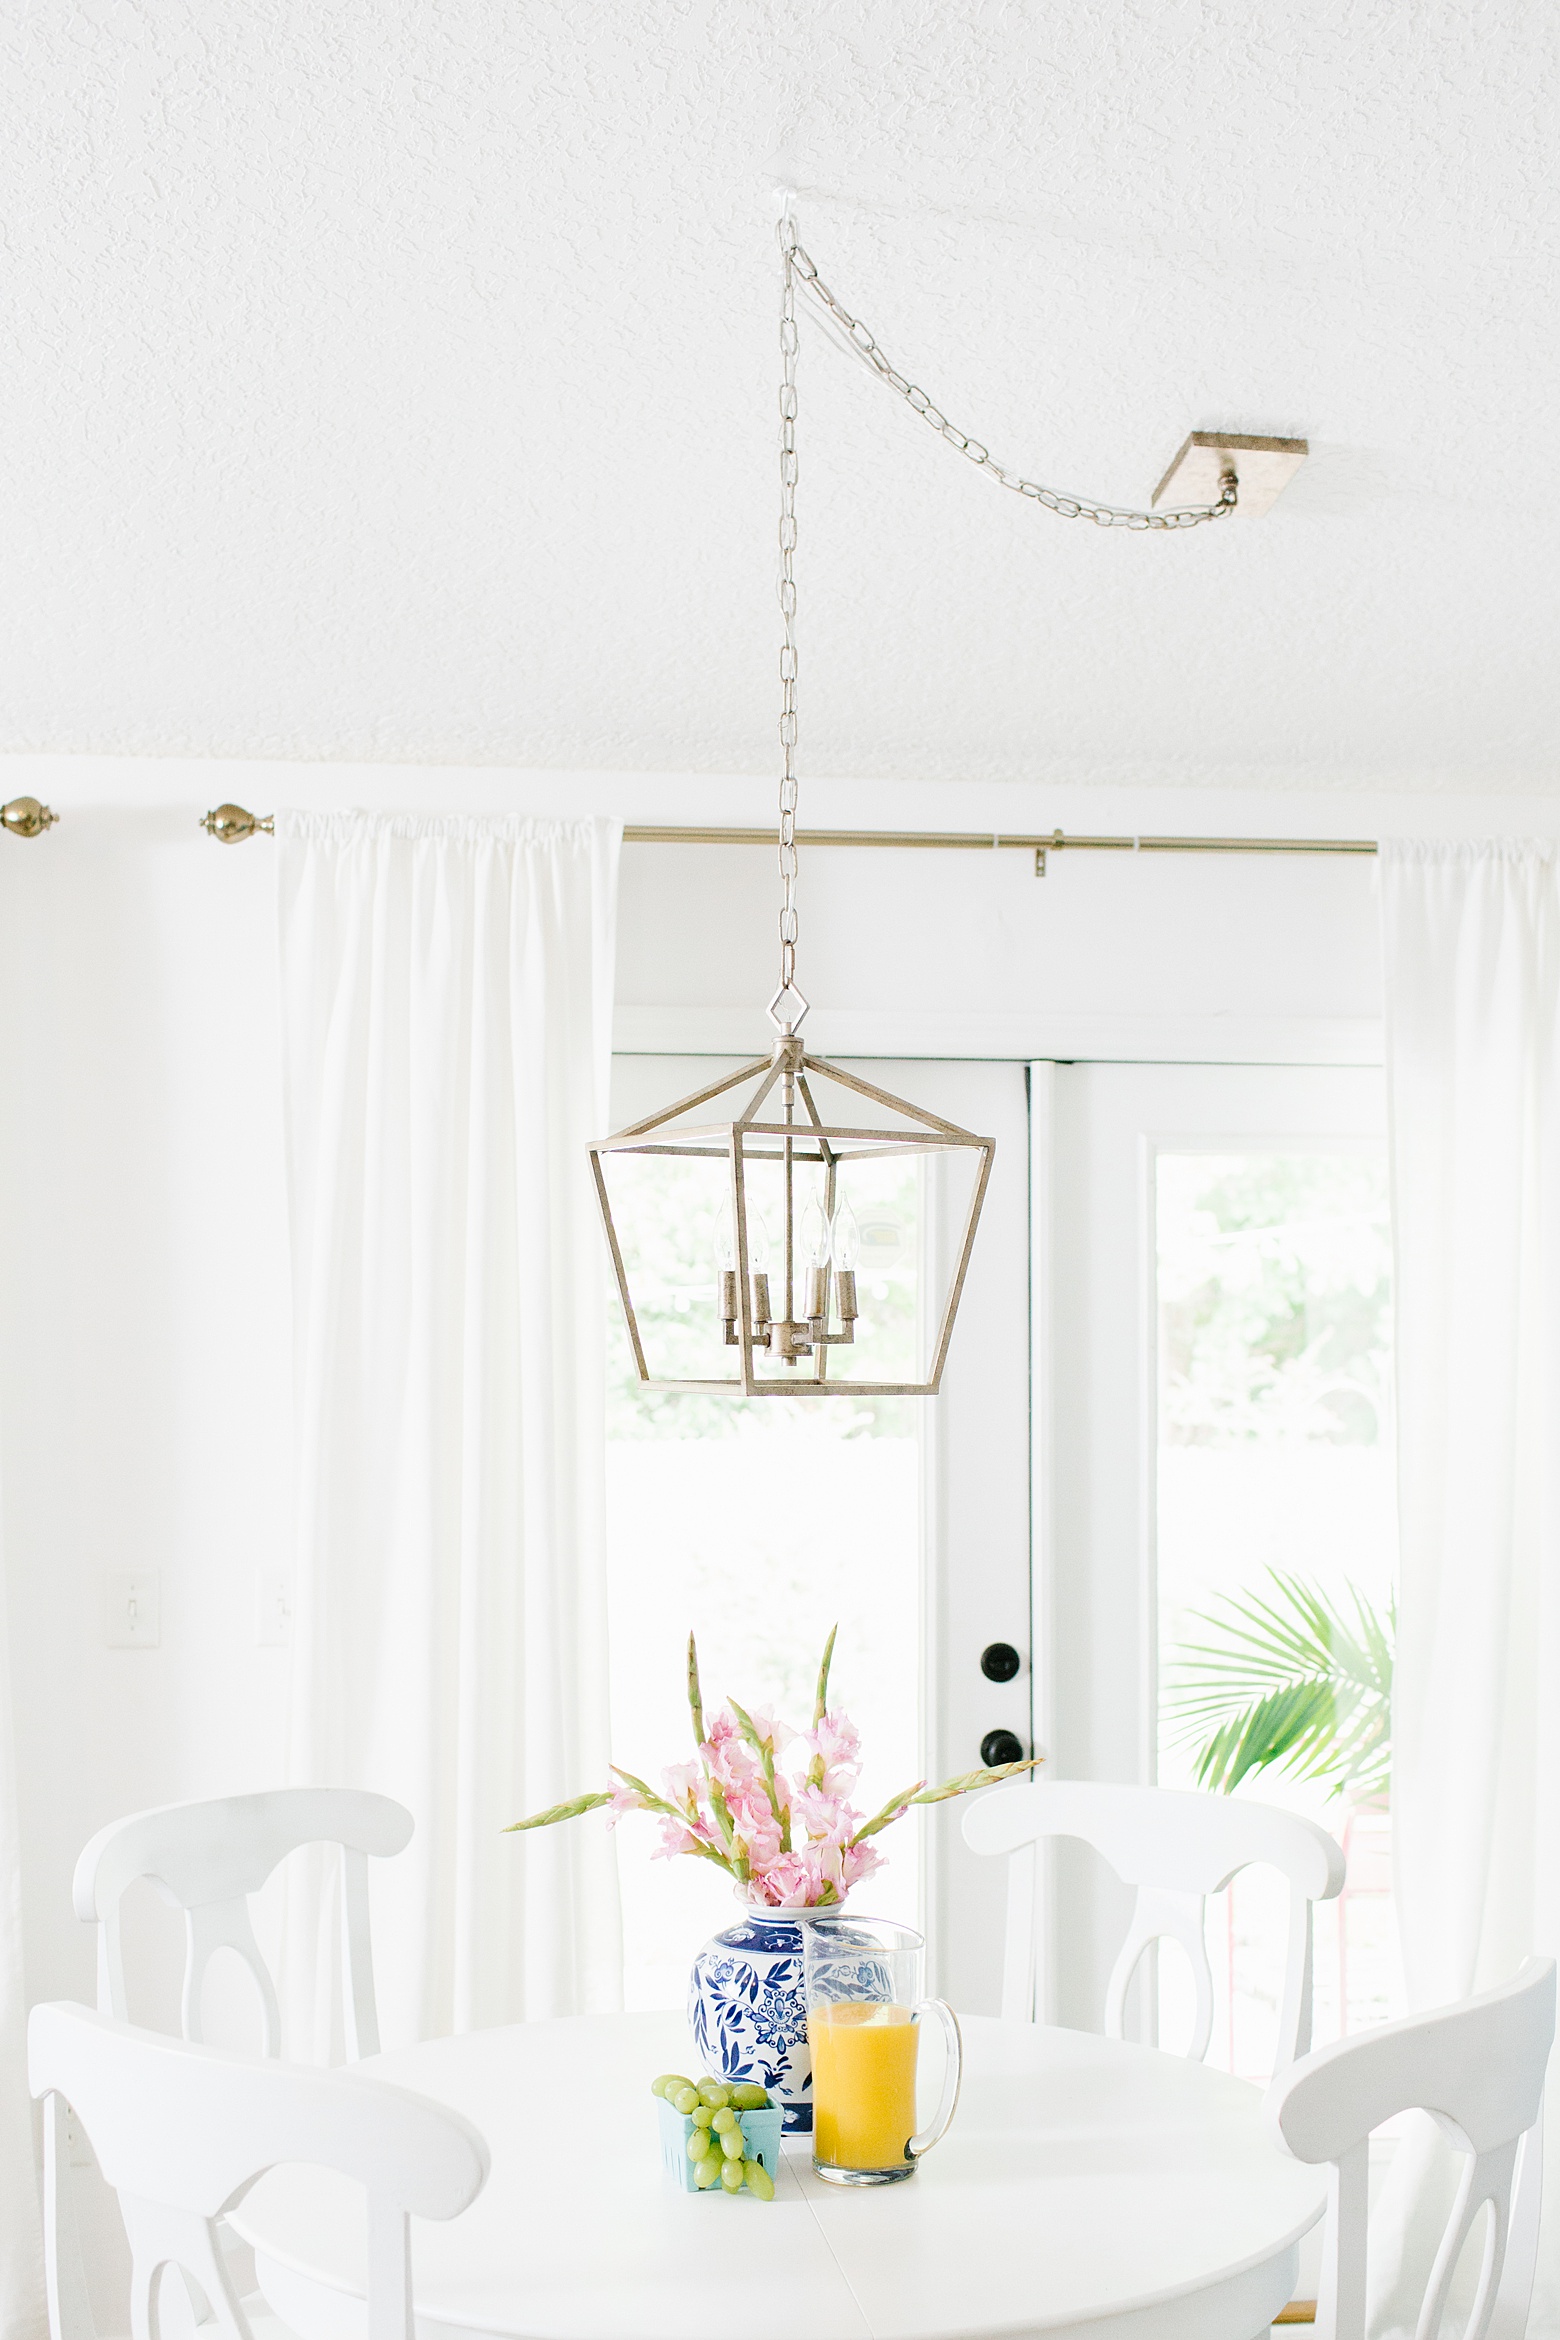 All bright white kitchen nook featuring a gold cage lantern pendant by Lighting Connection, white walls, white curtains, white and gold kitchen